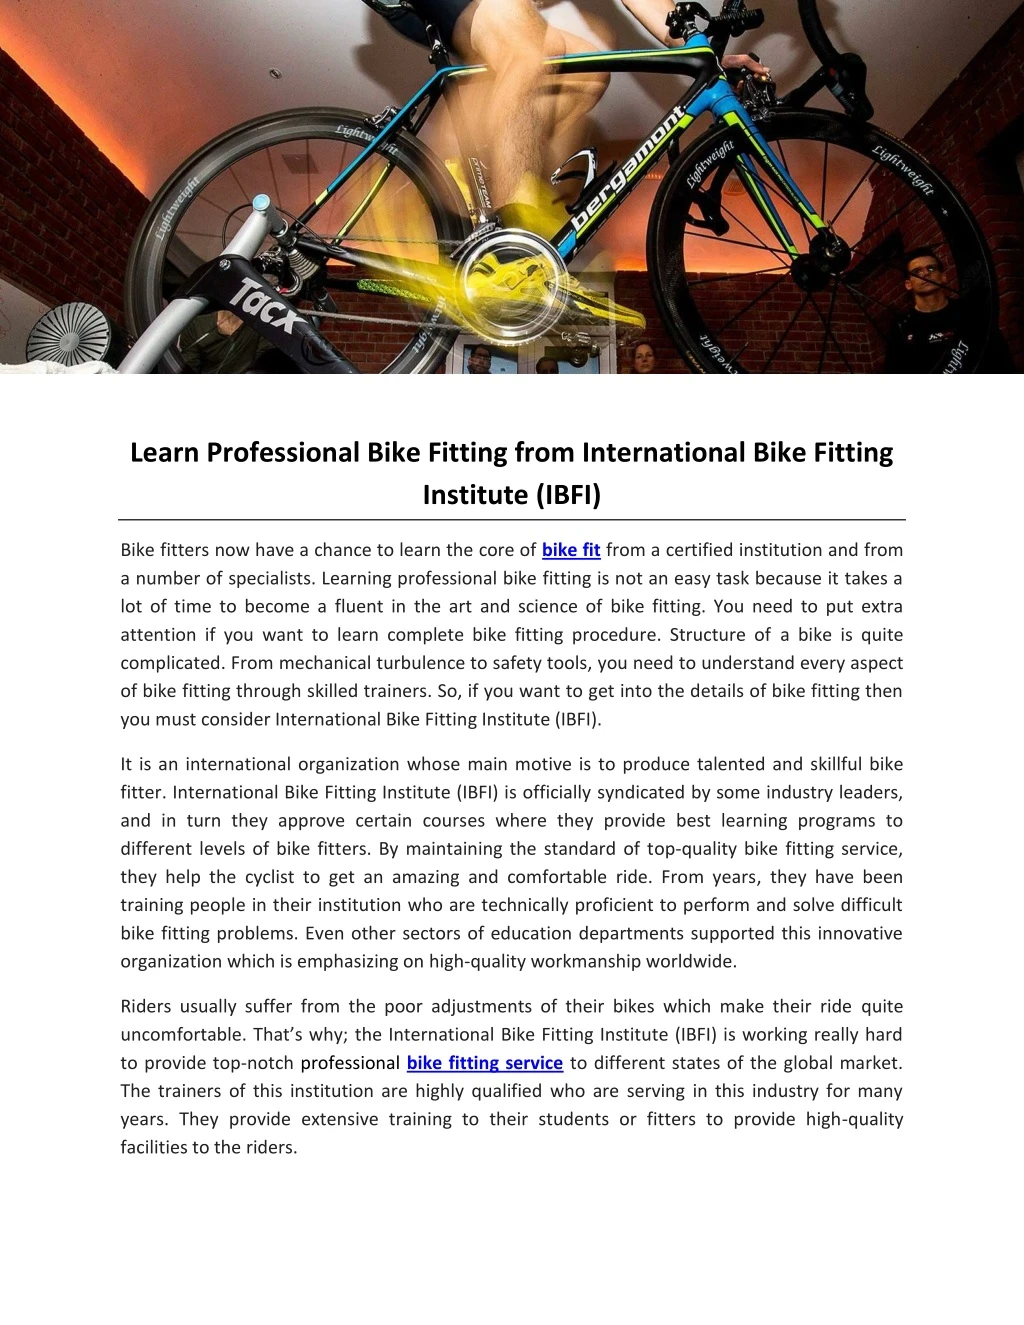 learn professional bike fitting from